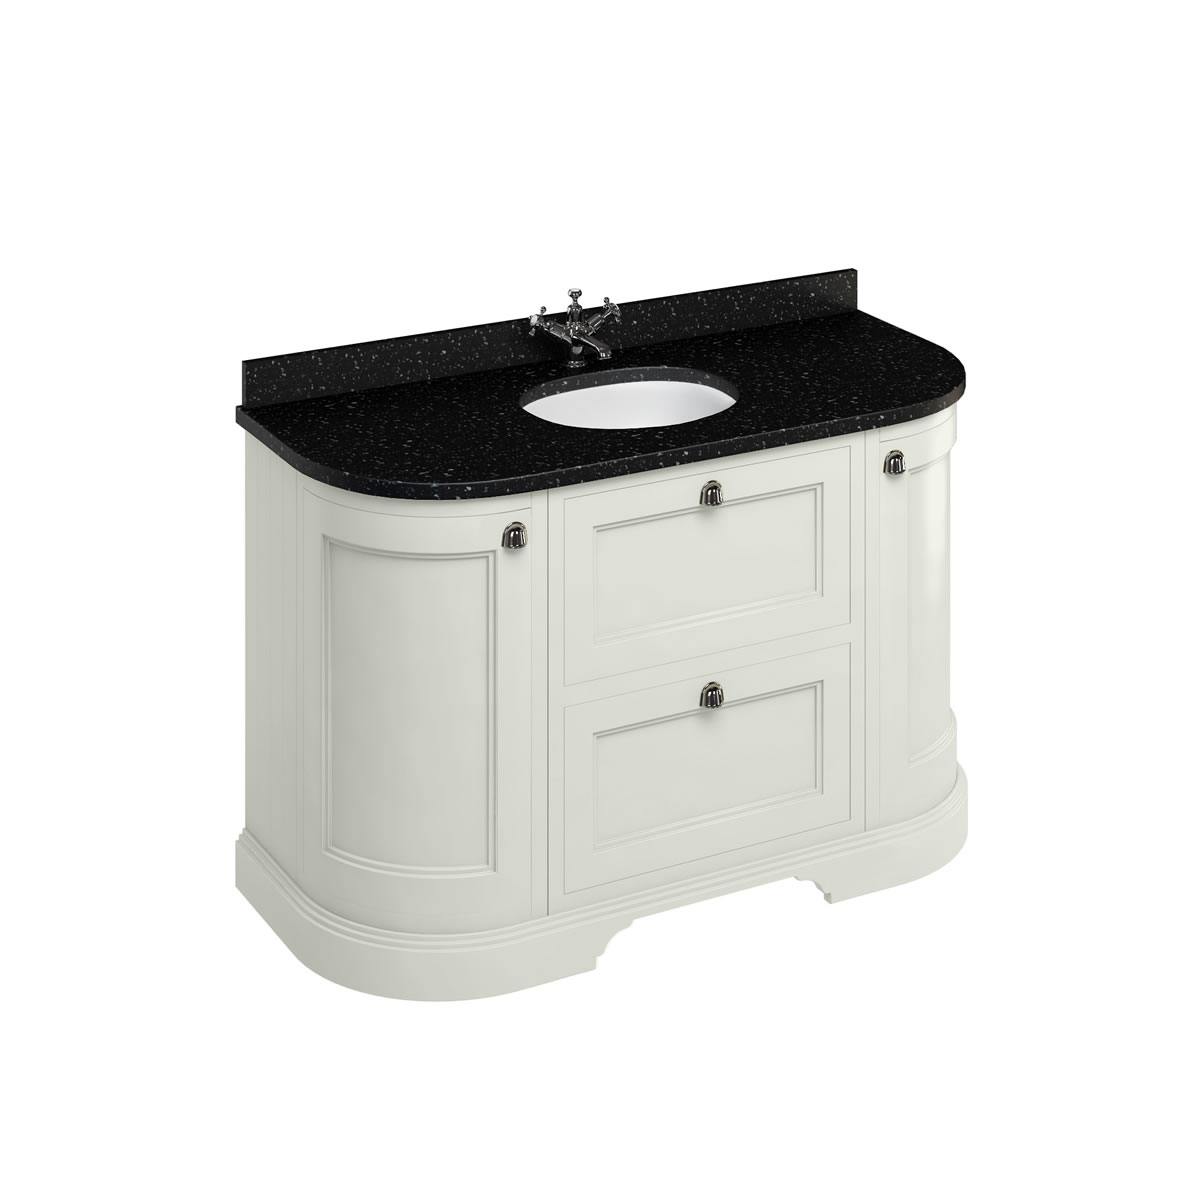 Freestanding 134 Curved Vanity Unit with drawers - Sand and Minerva black granite worktop with integrated white basin